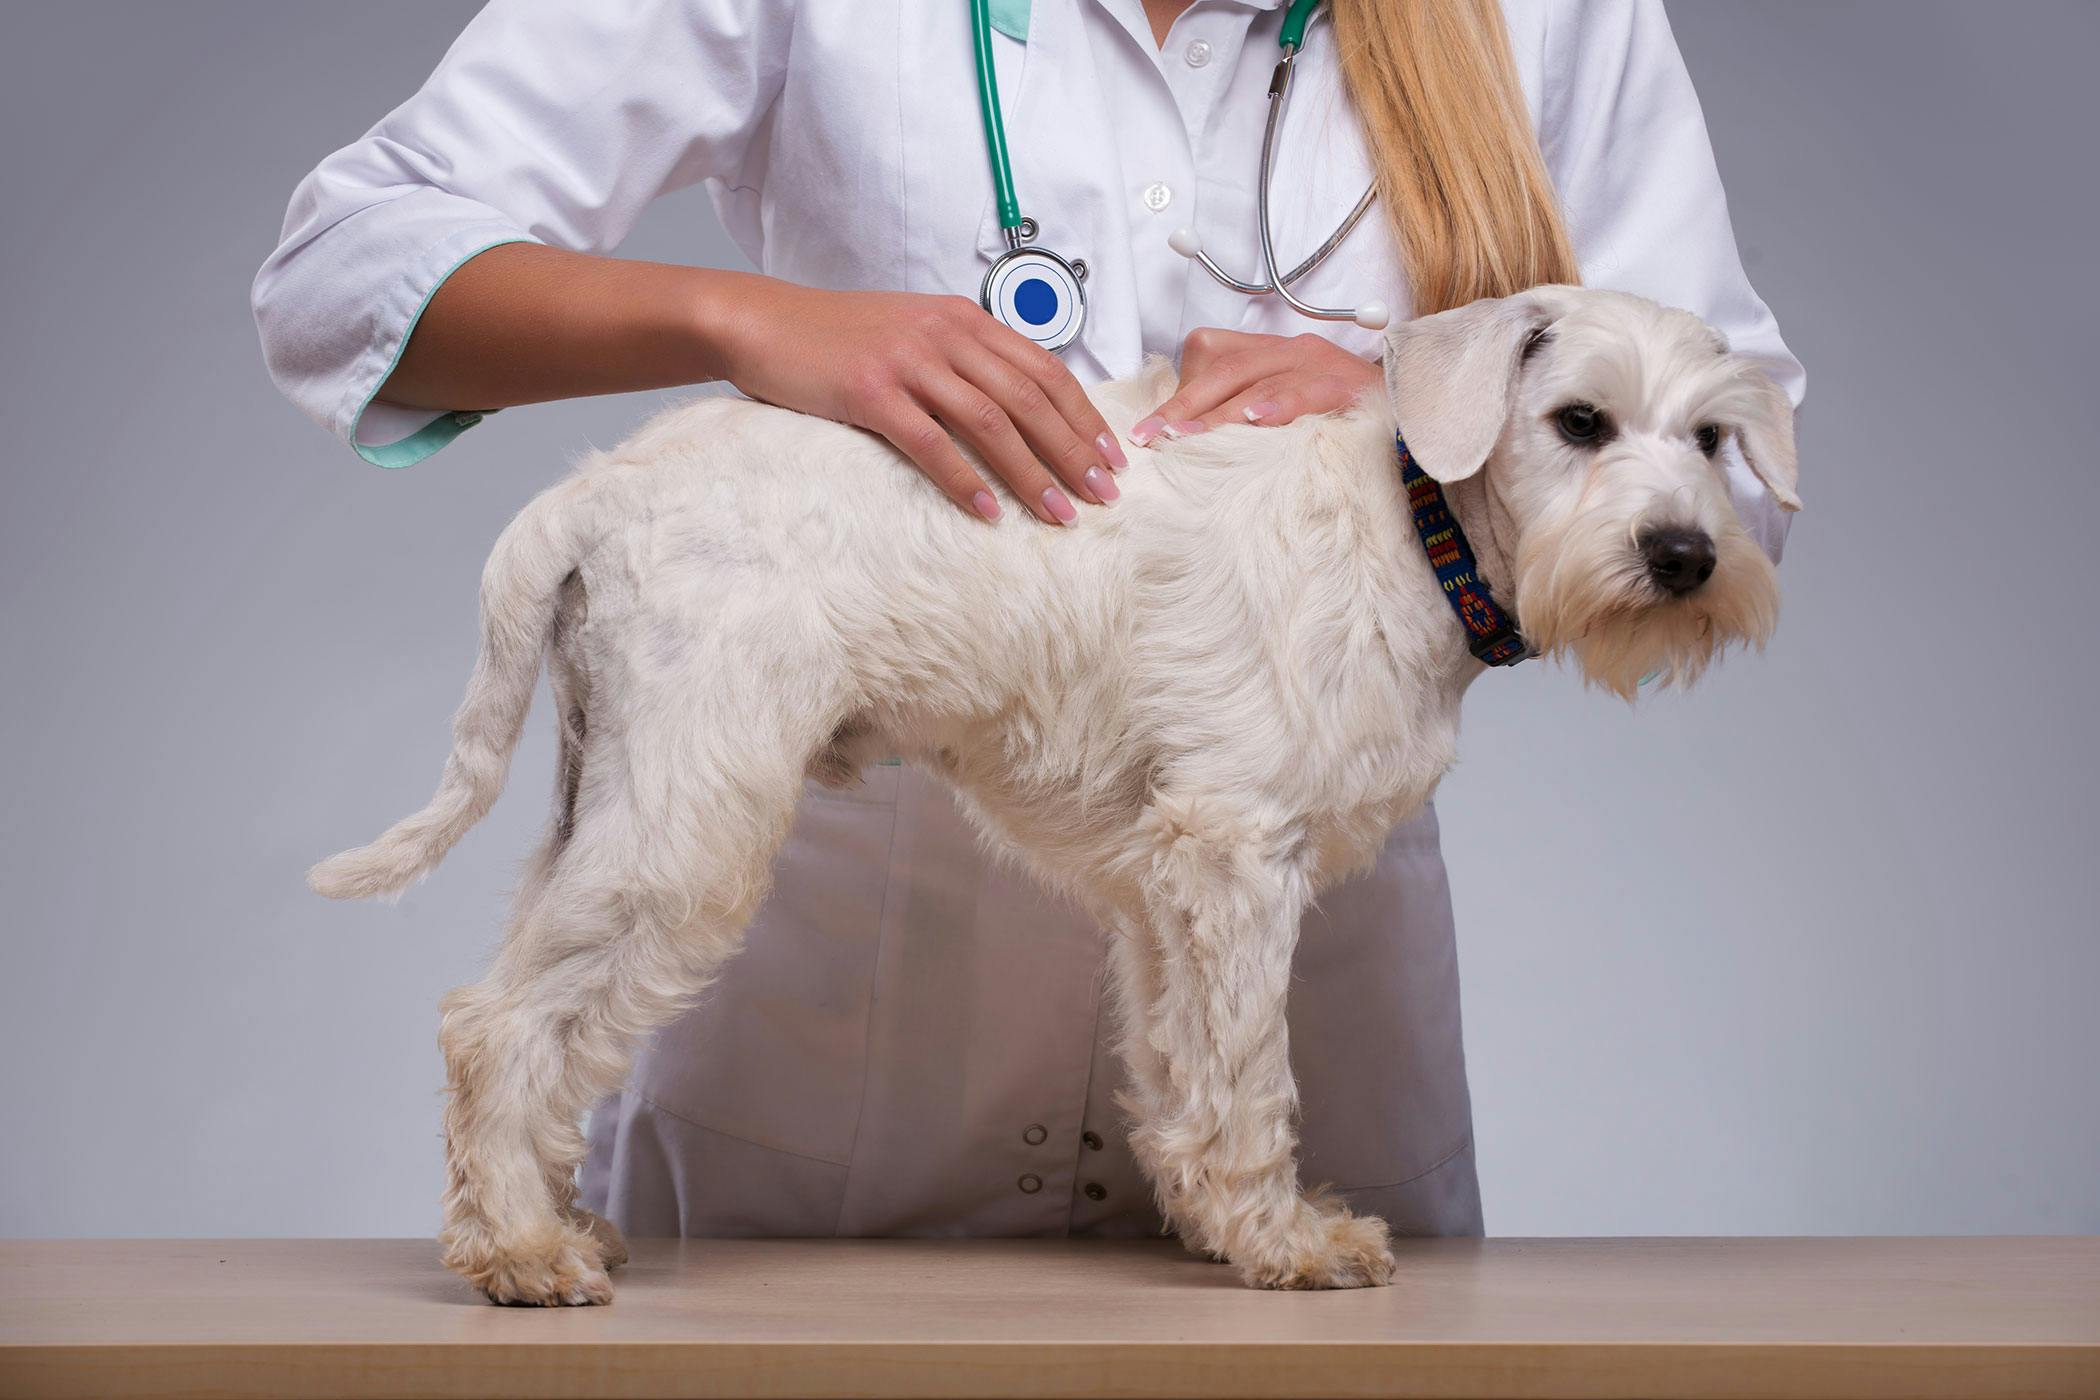 what causes lipomas in dogs